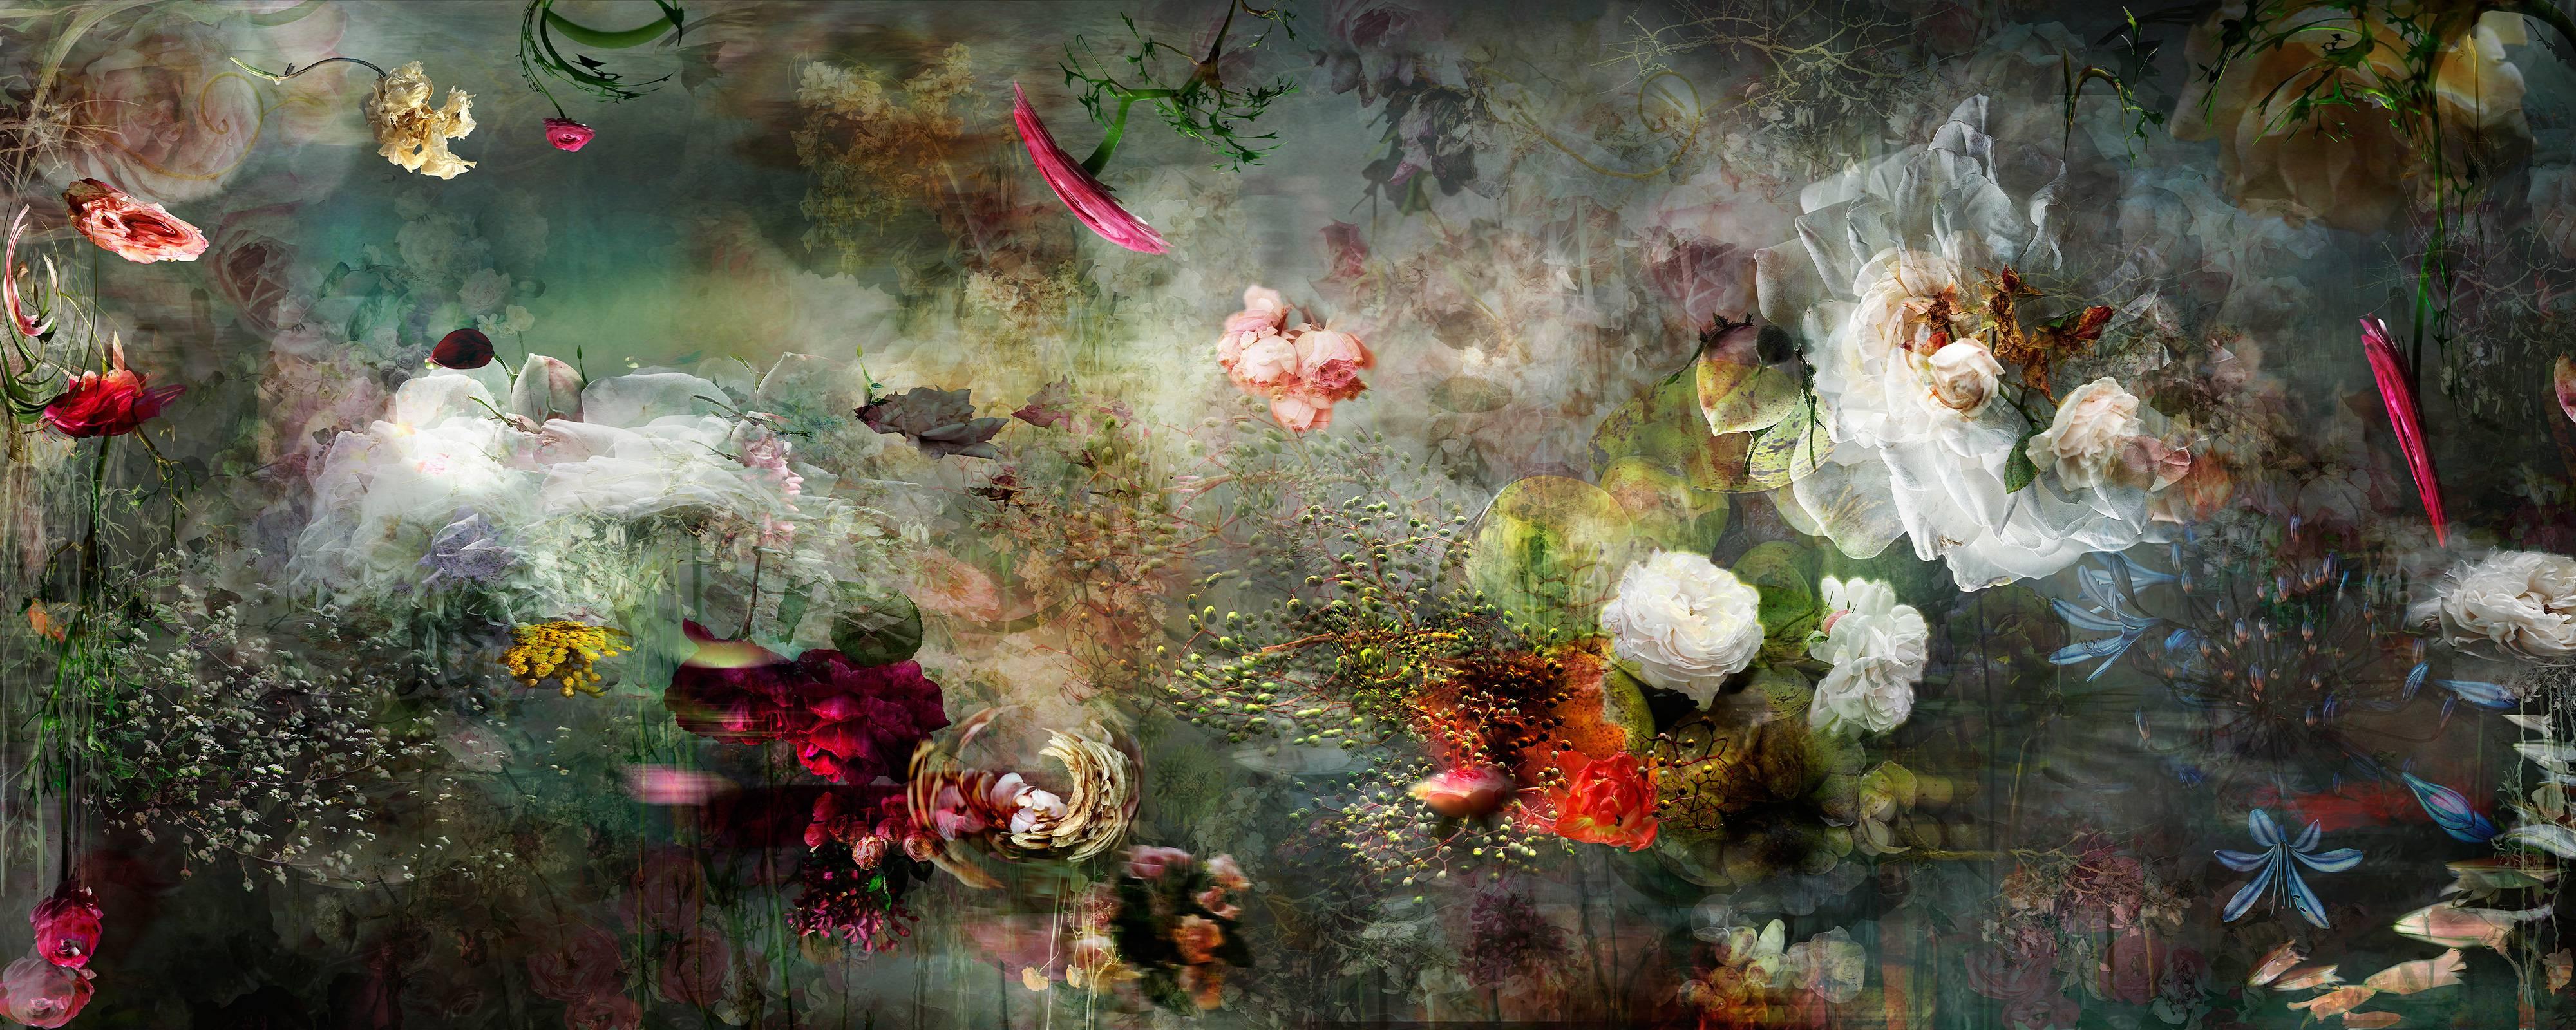 Isabelle Menin Still-Life Photograph - Song for dead heroes #2 dark color abstract floral landscape photo composition